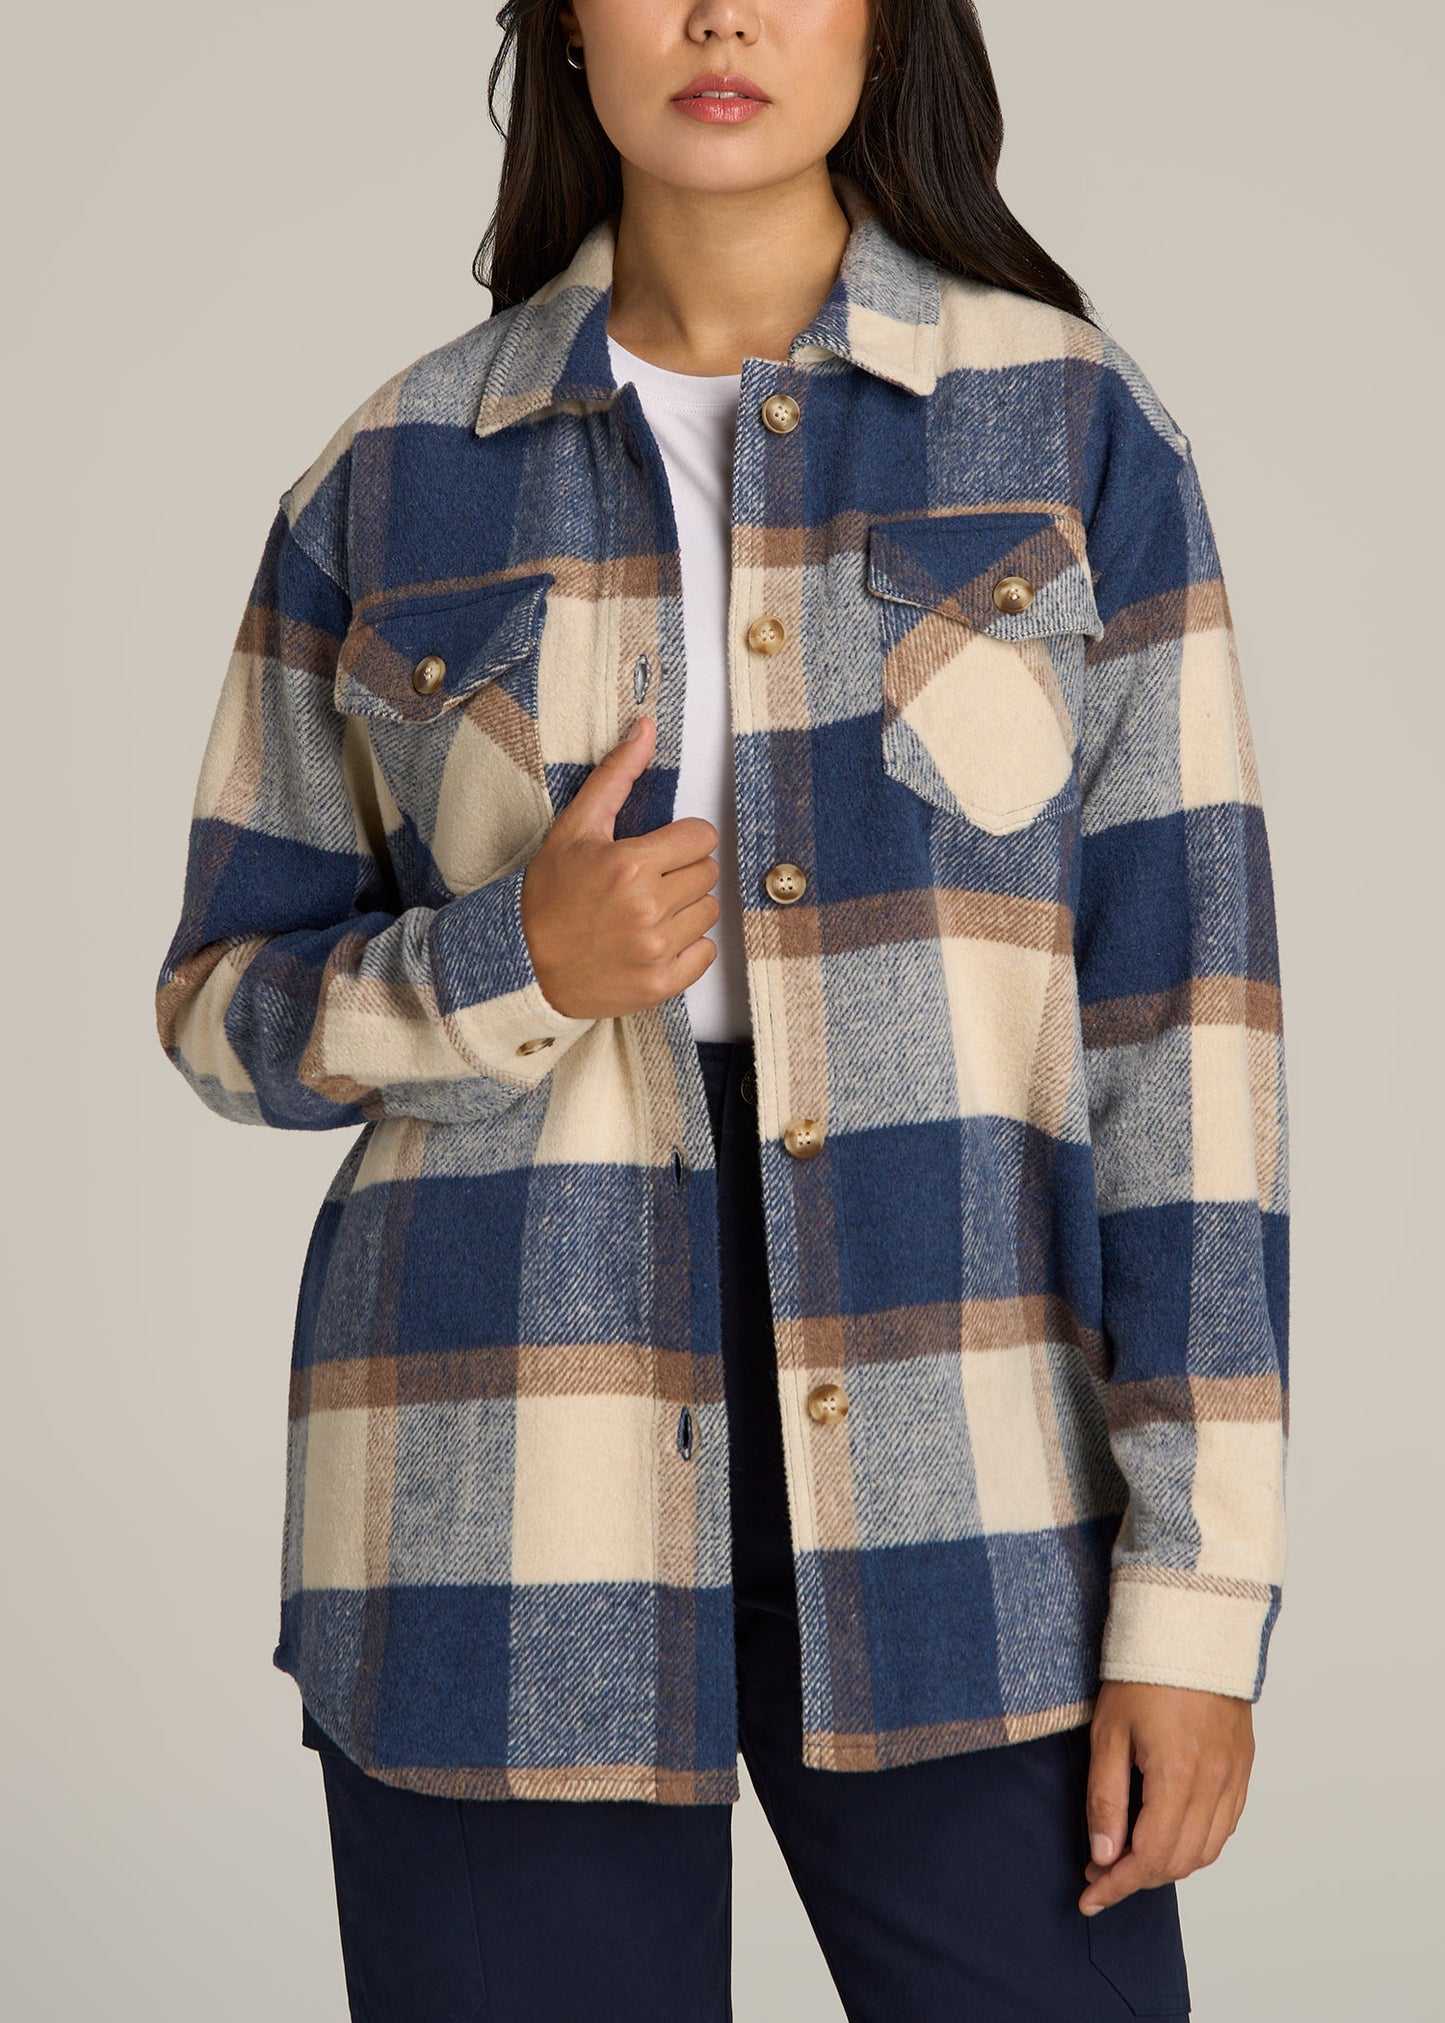 A tall woman wearing American Tall's Flannel Women's Tall Shacket in Cream and Denim Blue Paid.